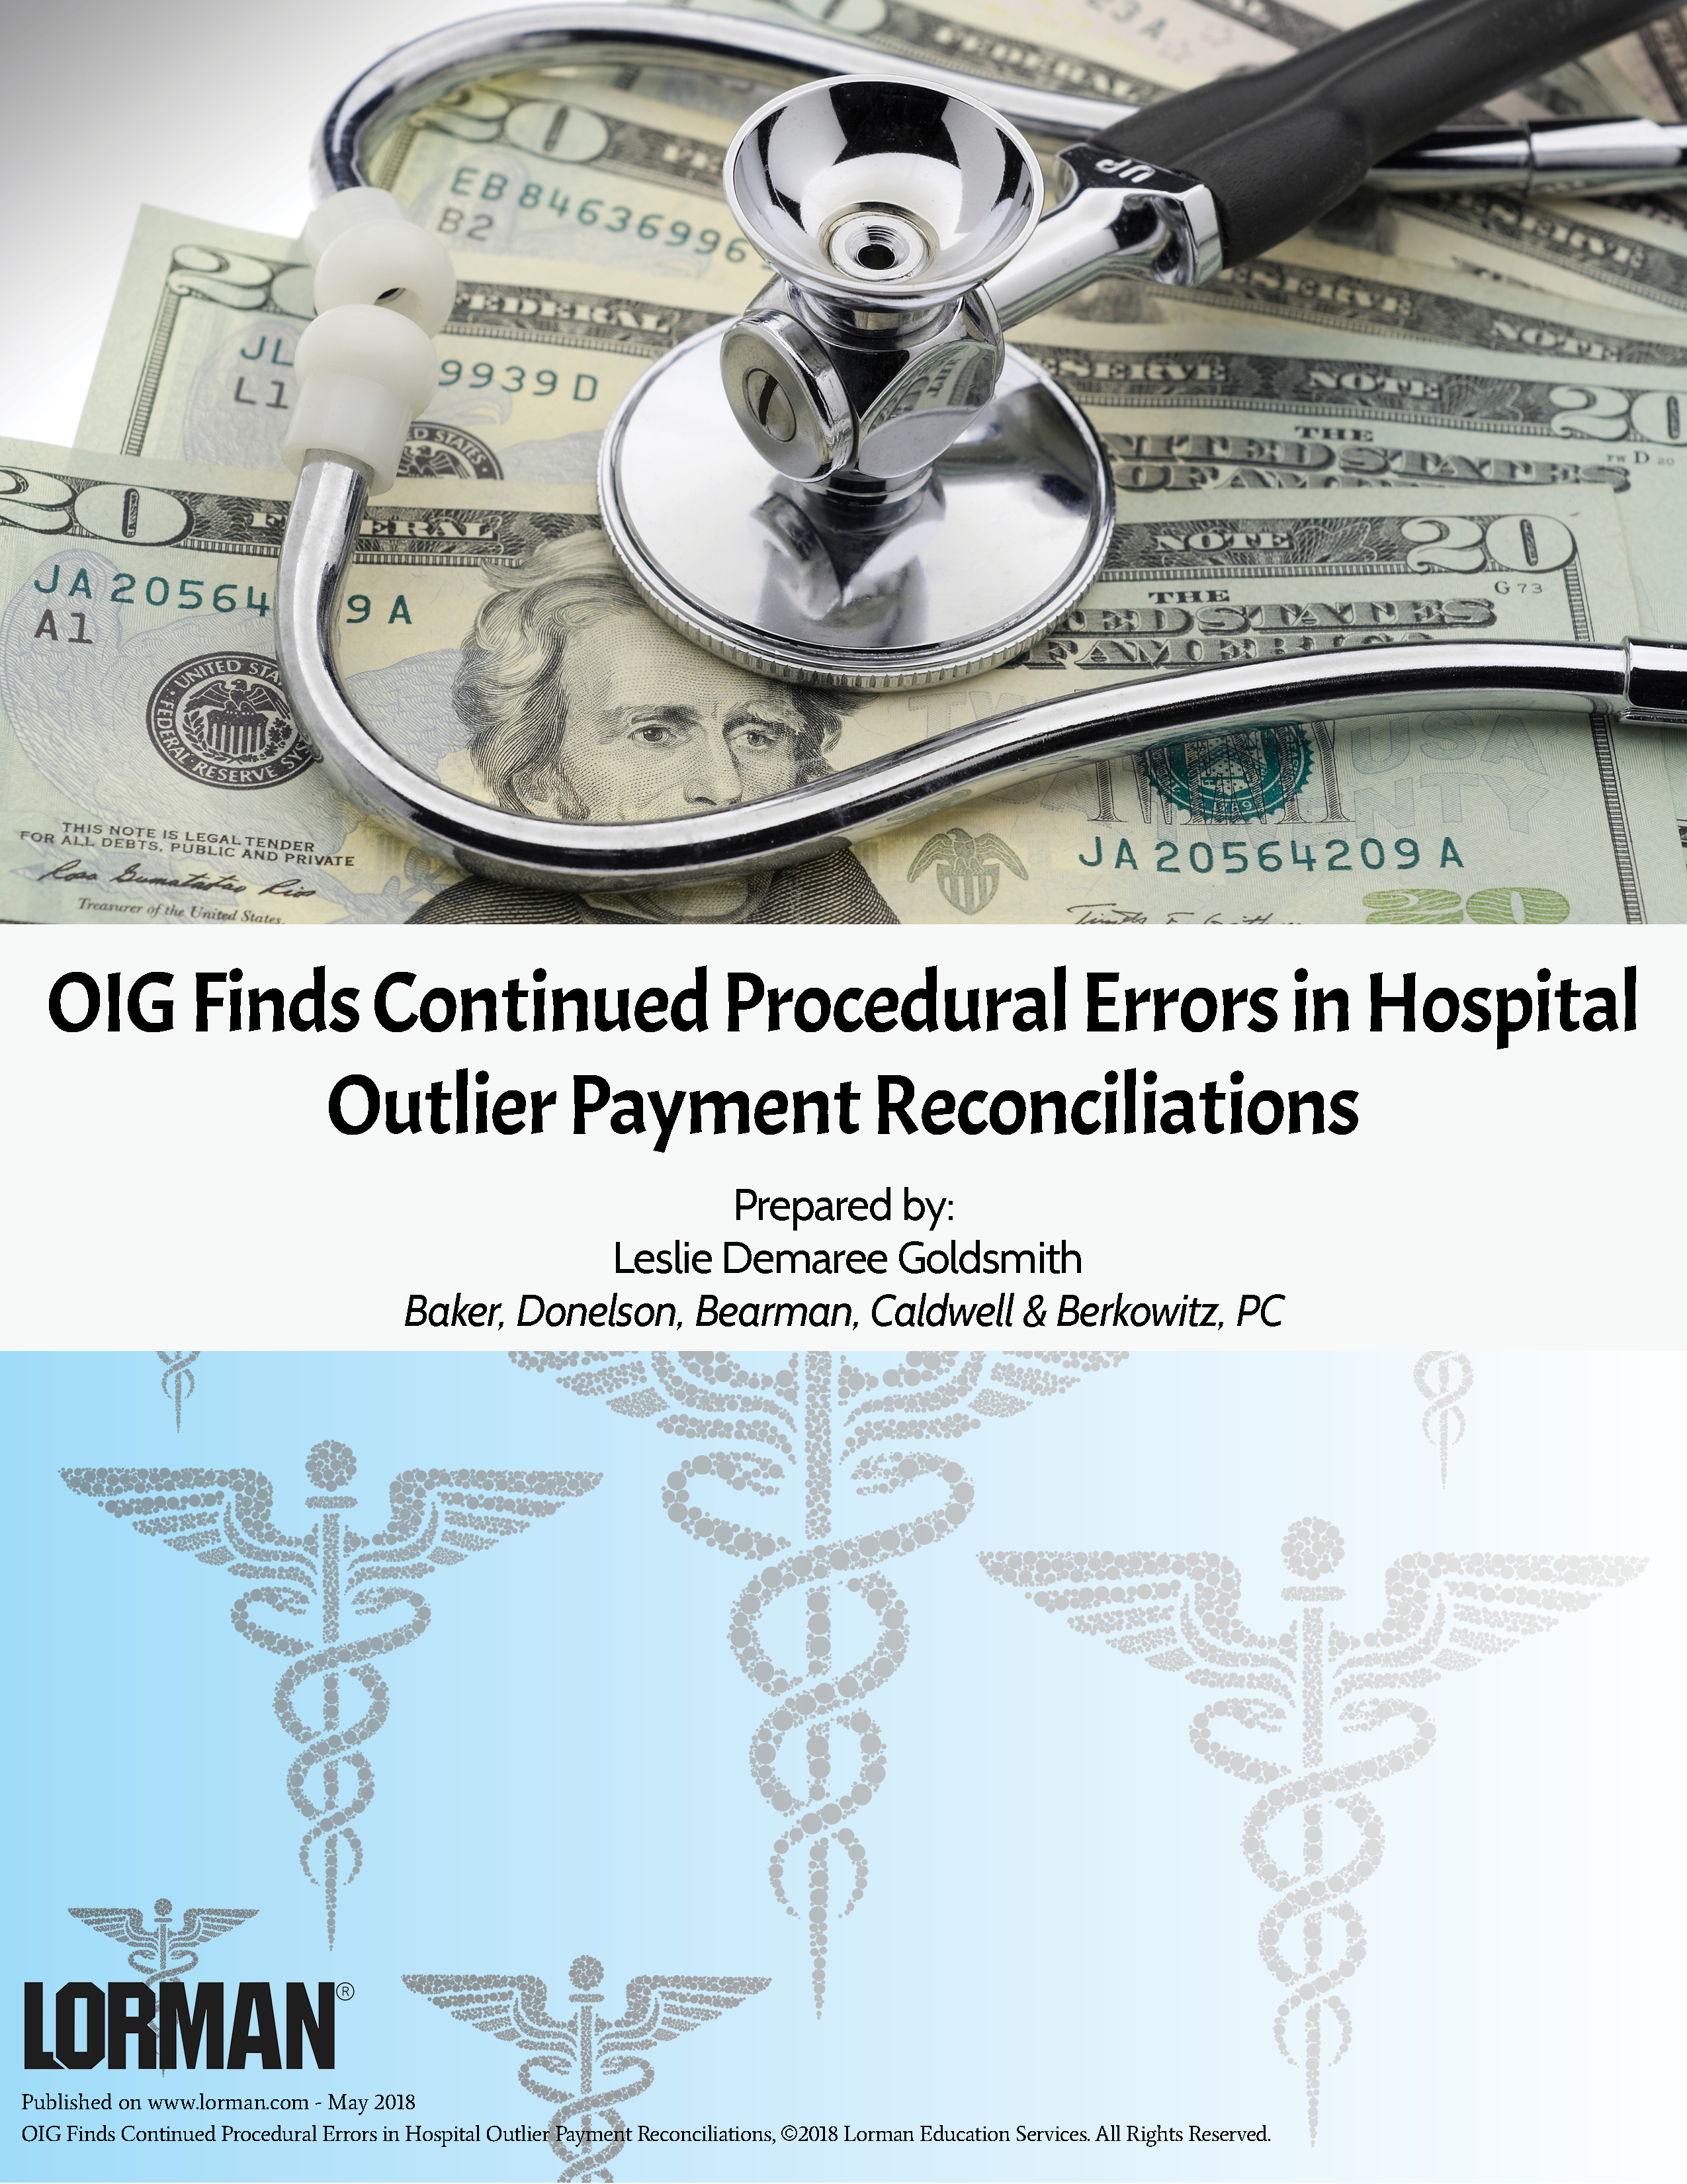 OIG Finds Continued Procedural Errors in Hospital Outlier Payment Reconciliations